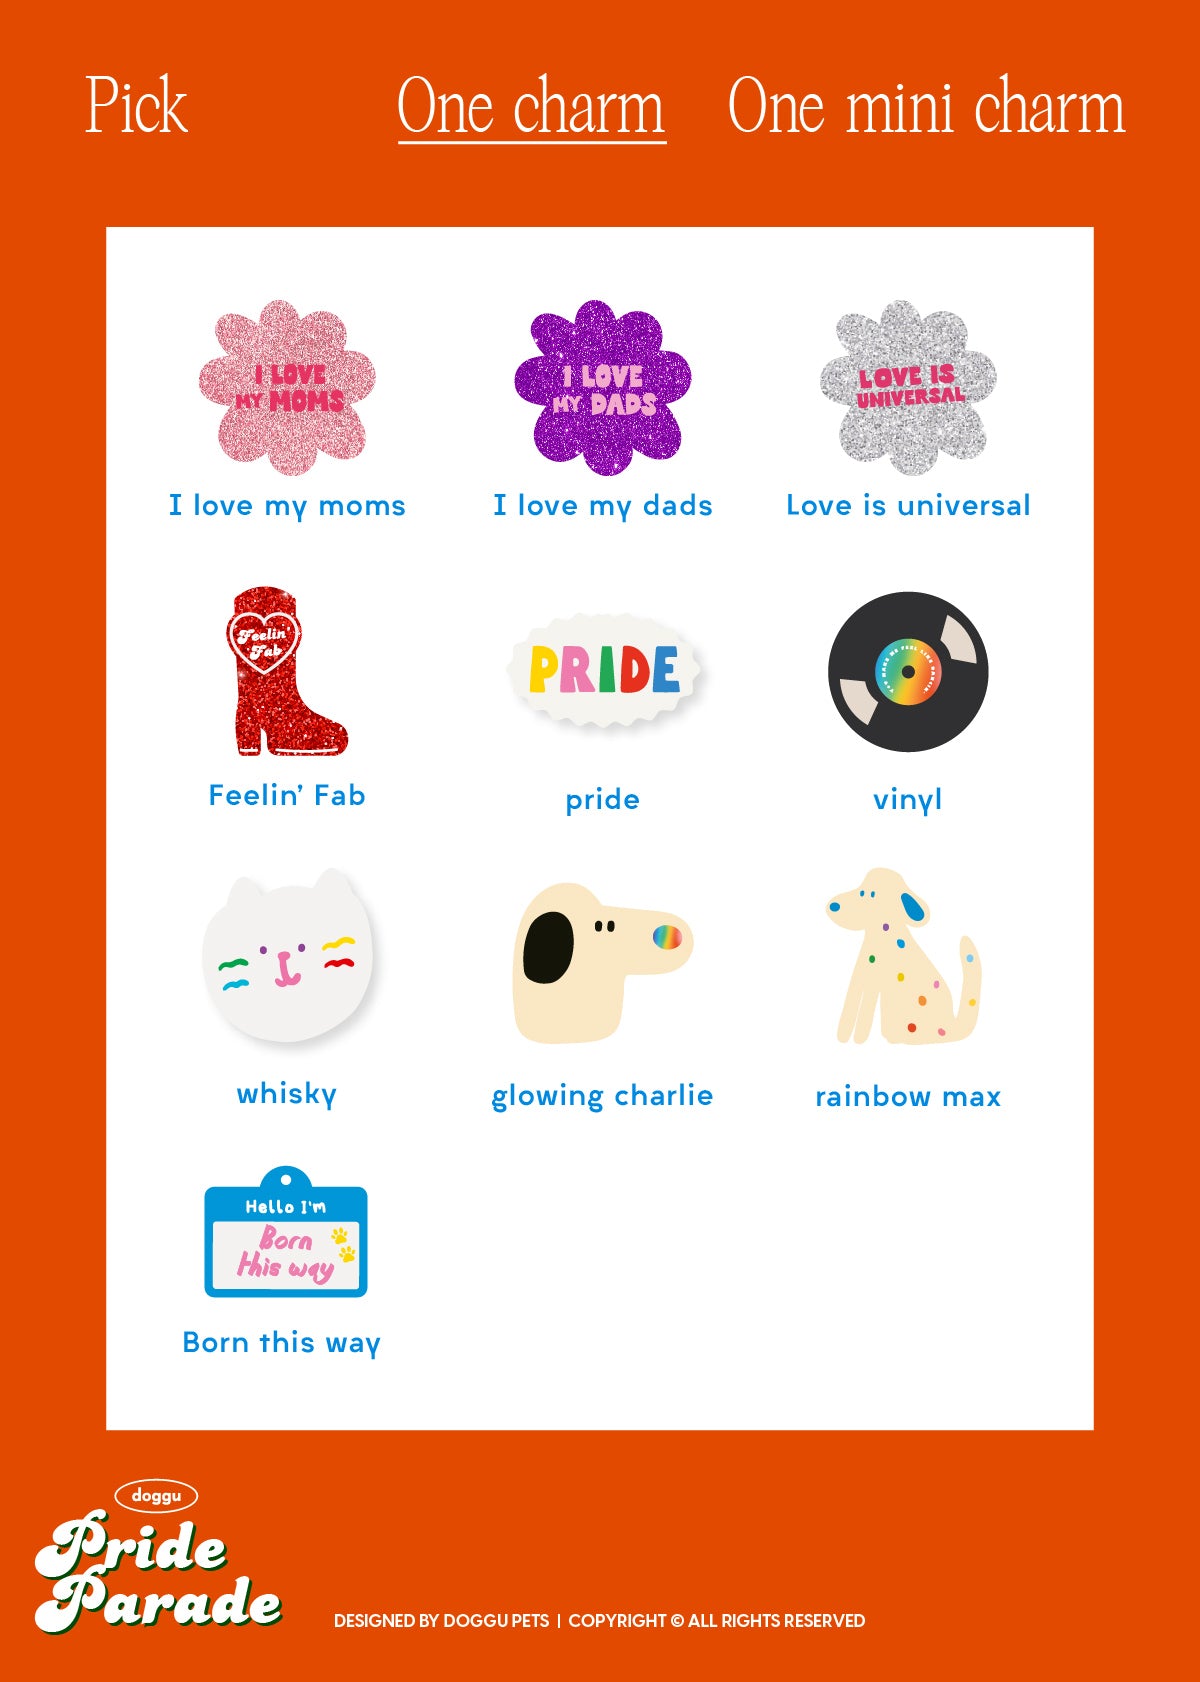 Create your own TAG : Pride parade